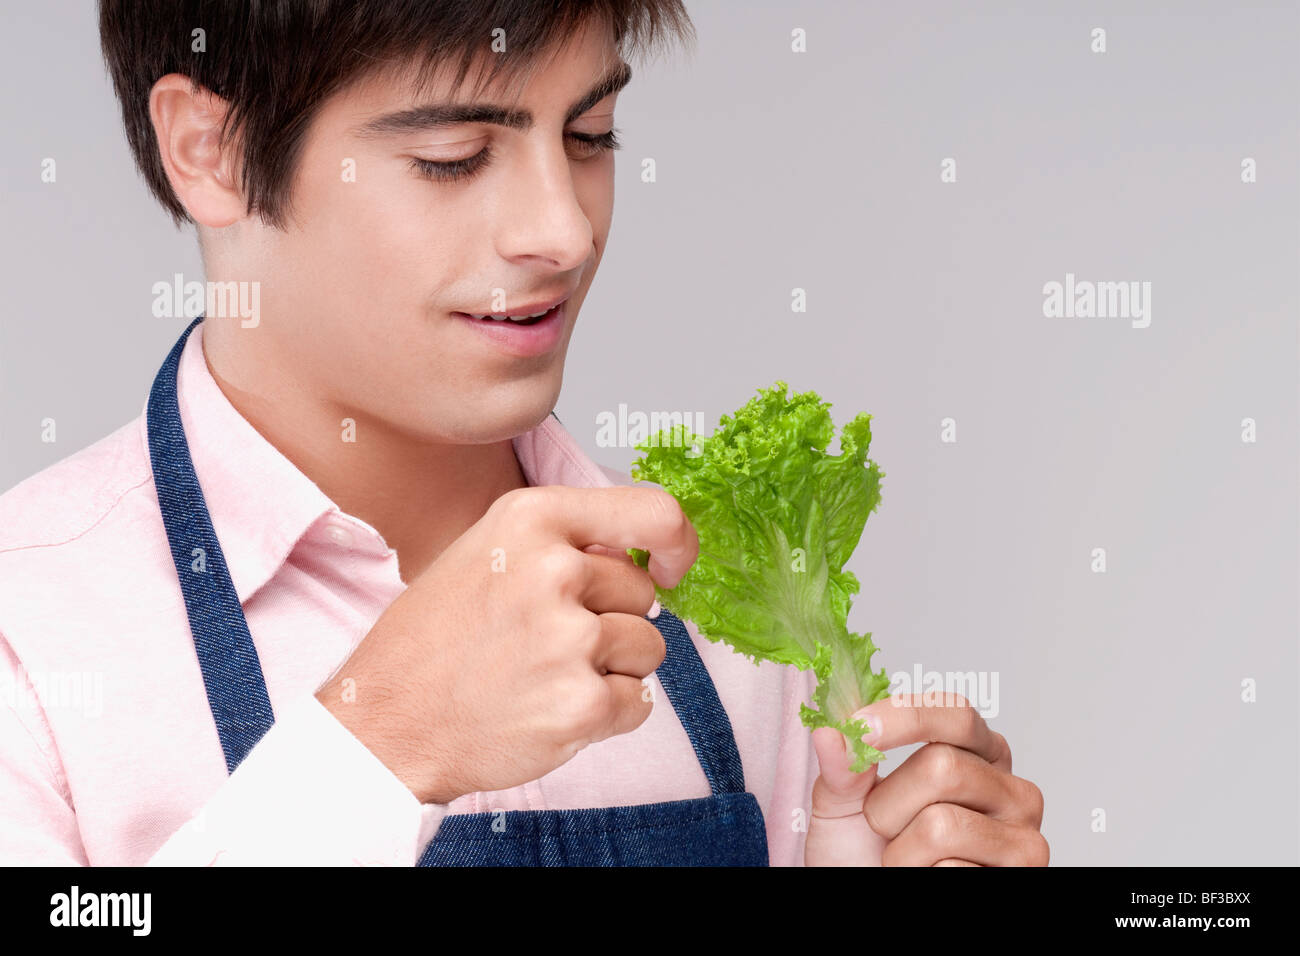 Close-up of a man holding a lettuce leaf Stock Photo